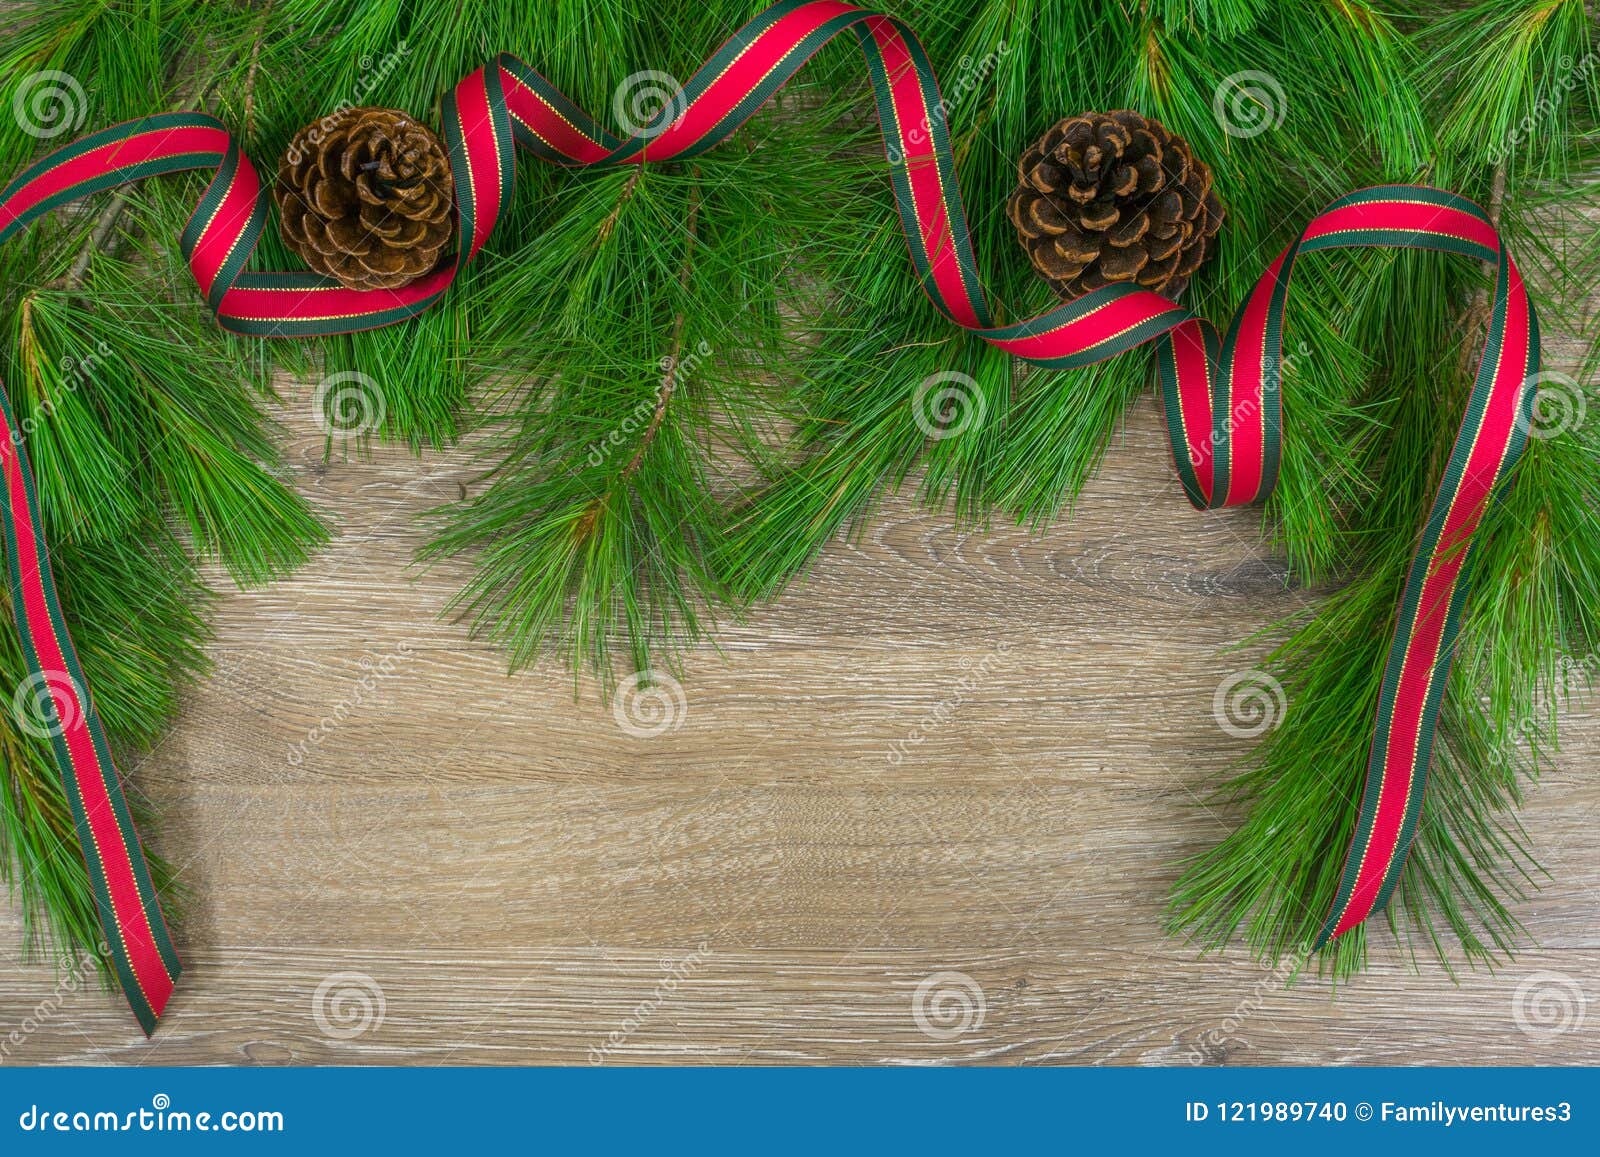 Pinecones Along with Red and Green Christmas Ribbon on White Pin Stock ...